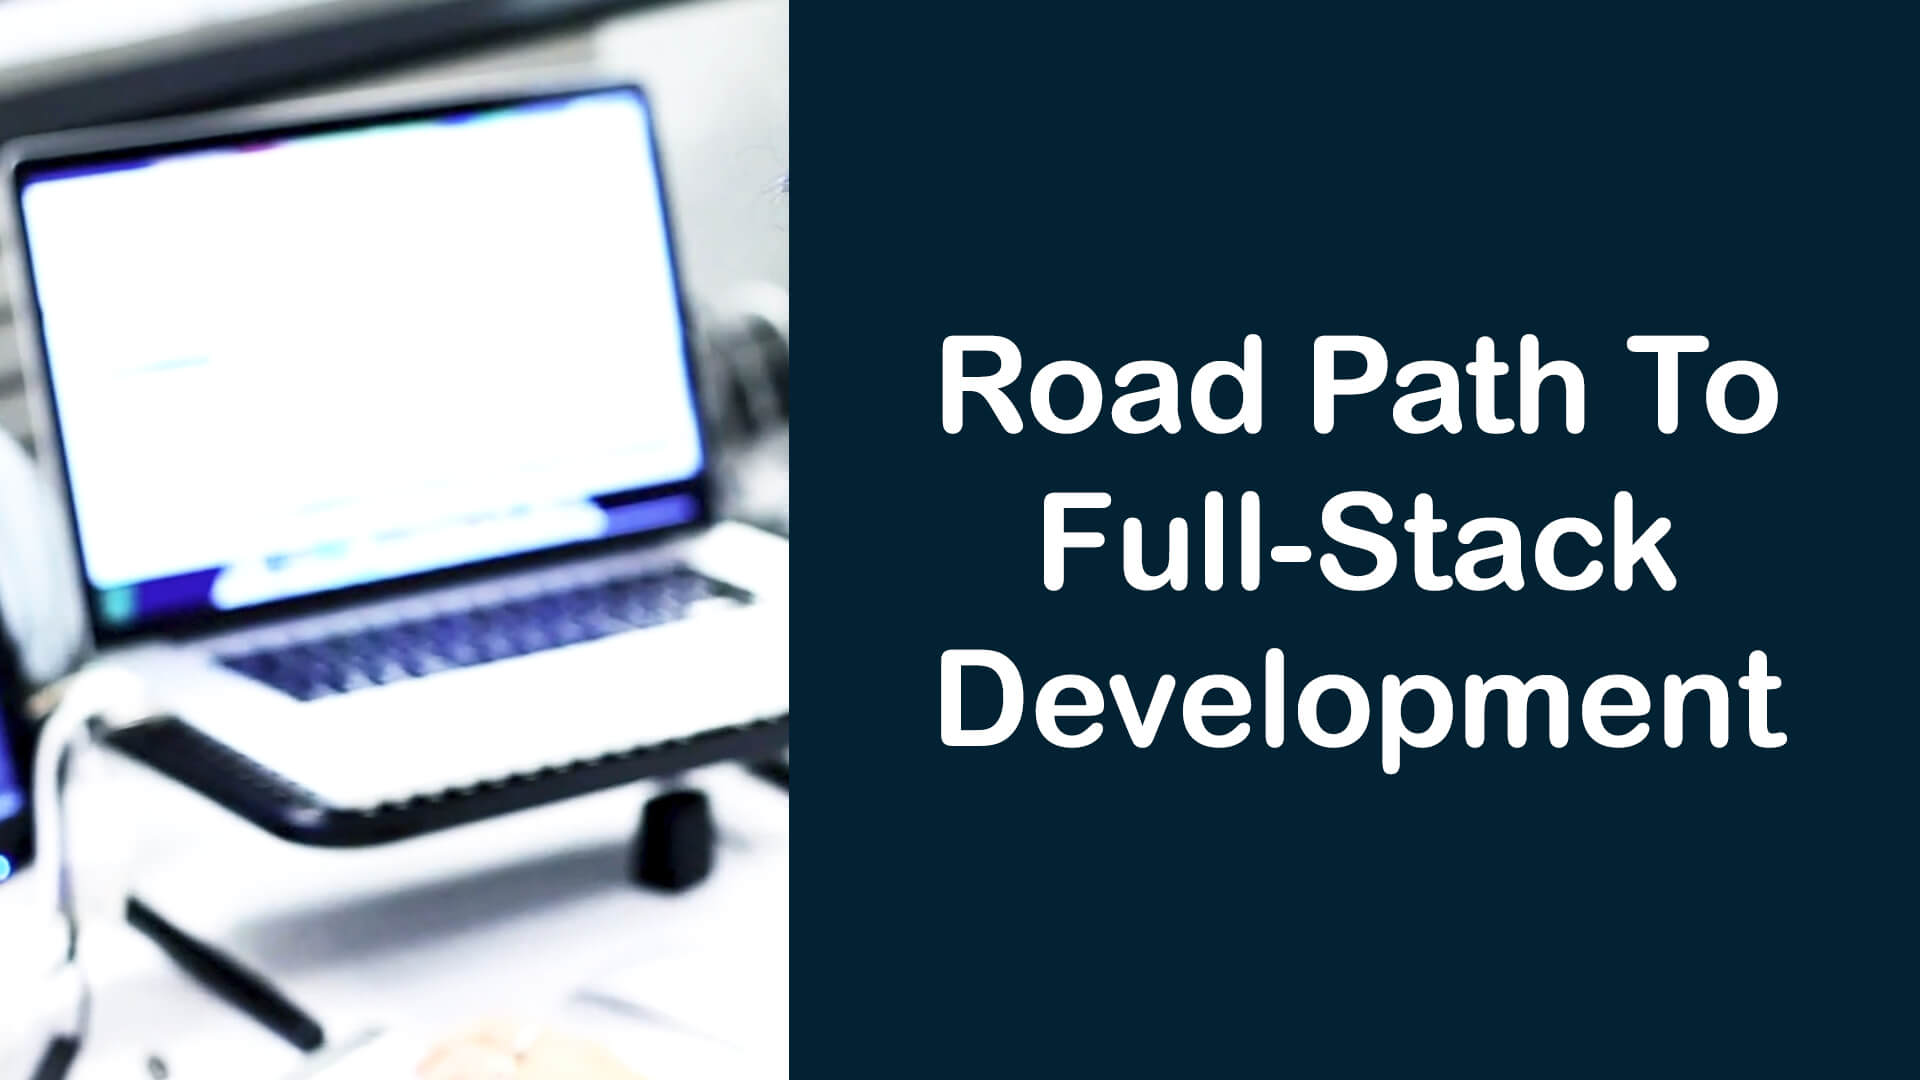 The Complete Road Path To Full-Stack Development